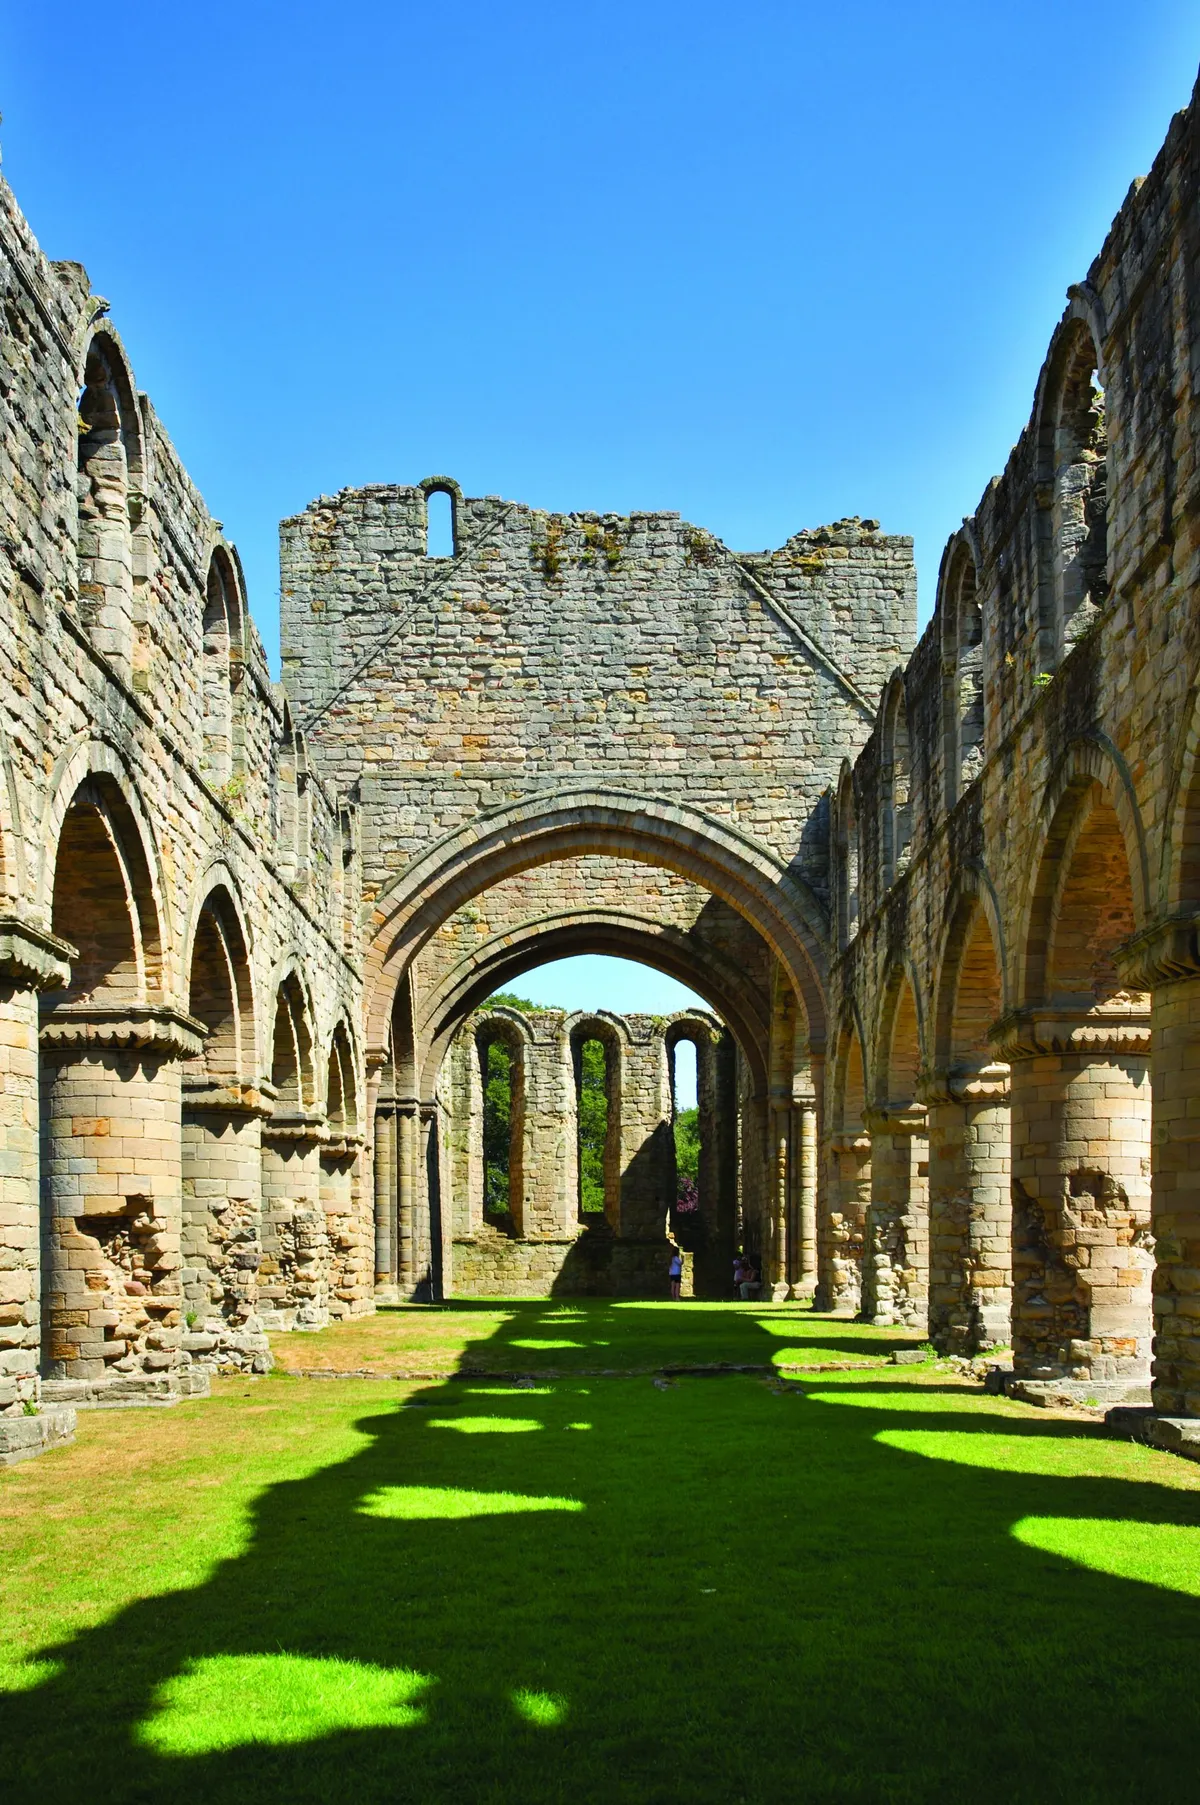 Buildwas Abbey in nearby Telford is looked after by English Heritage. Wander around impressive ruins of a Cistercian abbey including its unaltered 12th-century church.